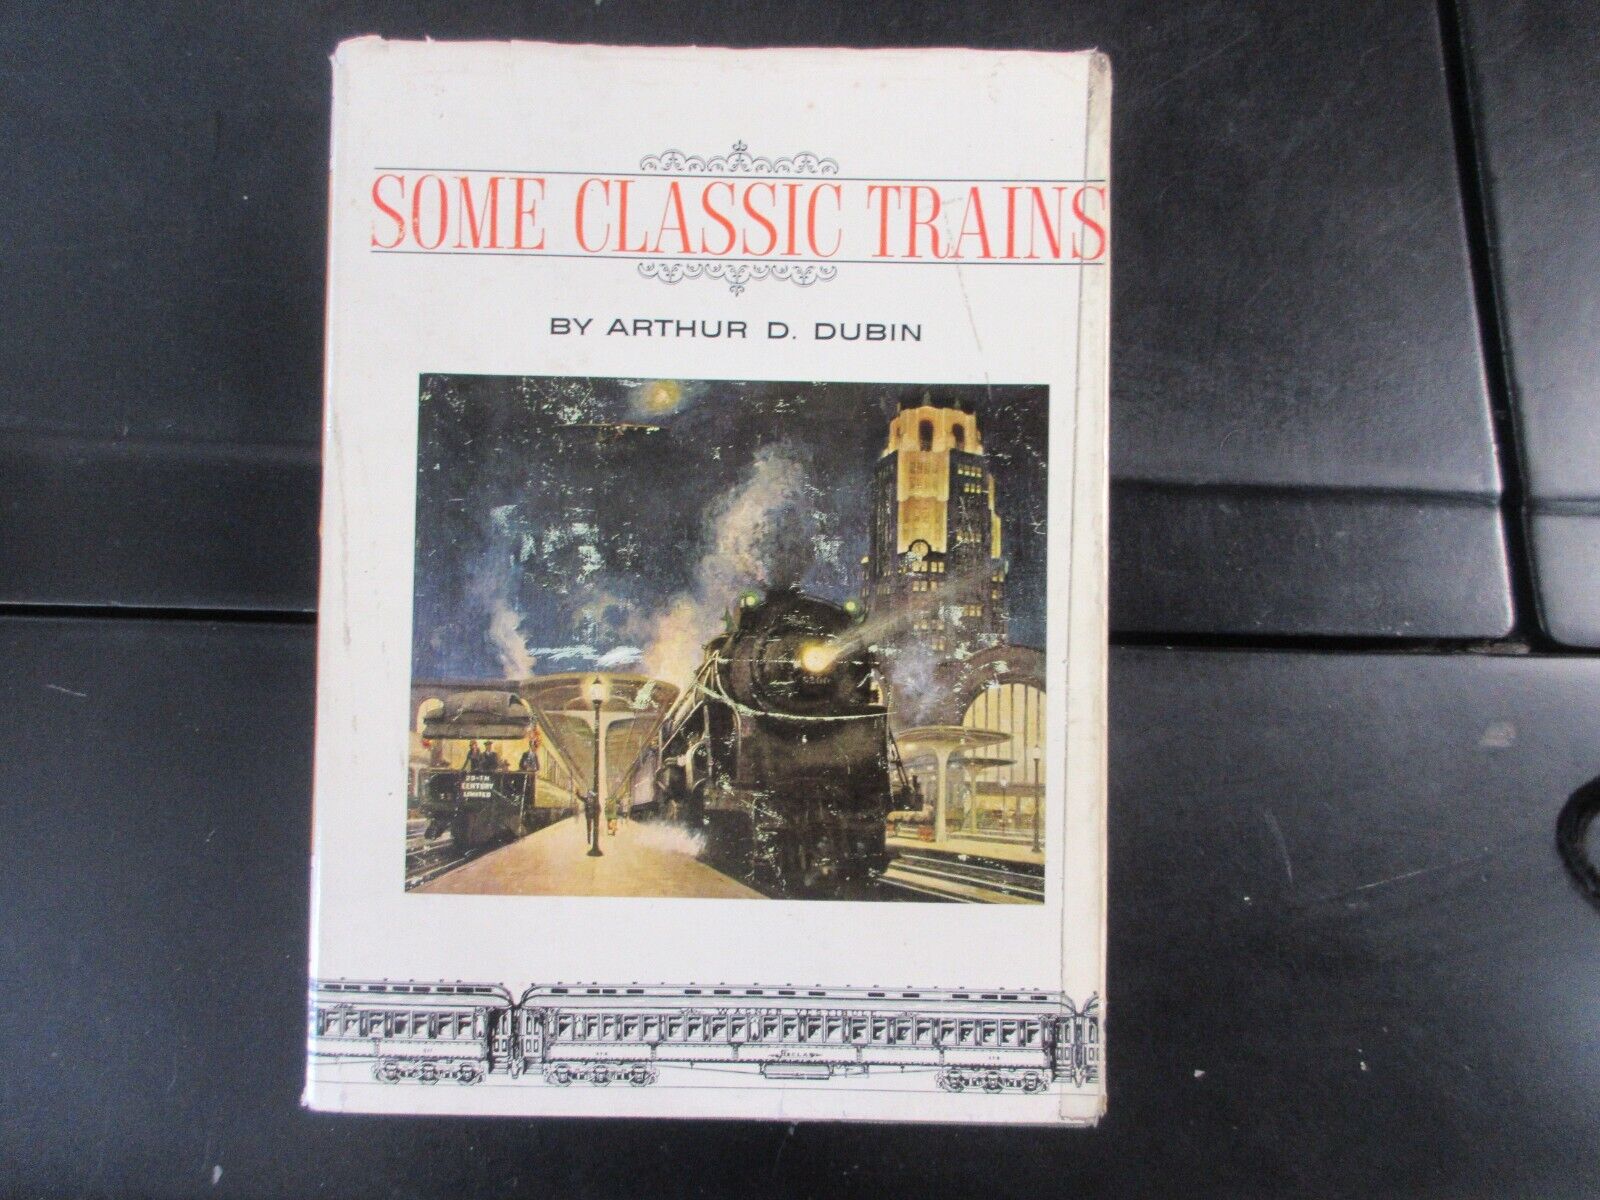 SOME CLASSIC TRAINS By Arthur D. Dubin - Hardcover-1976-Free Shipping